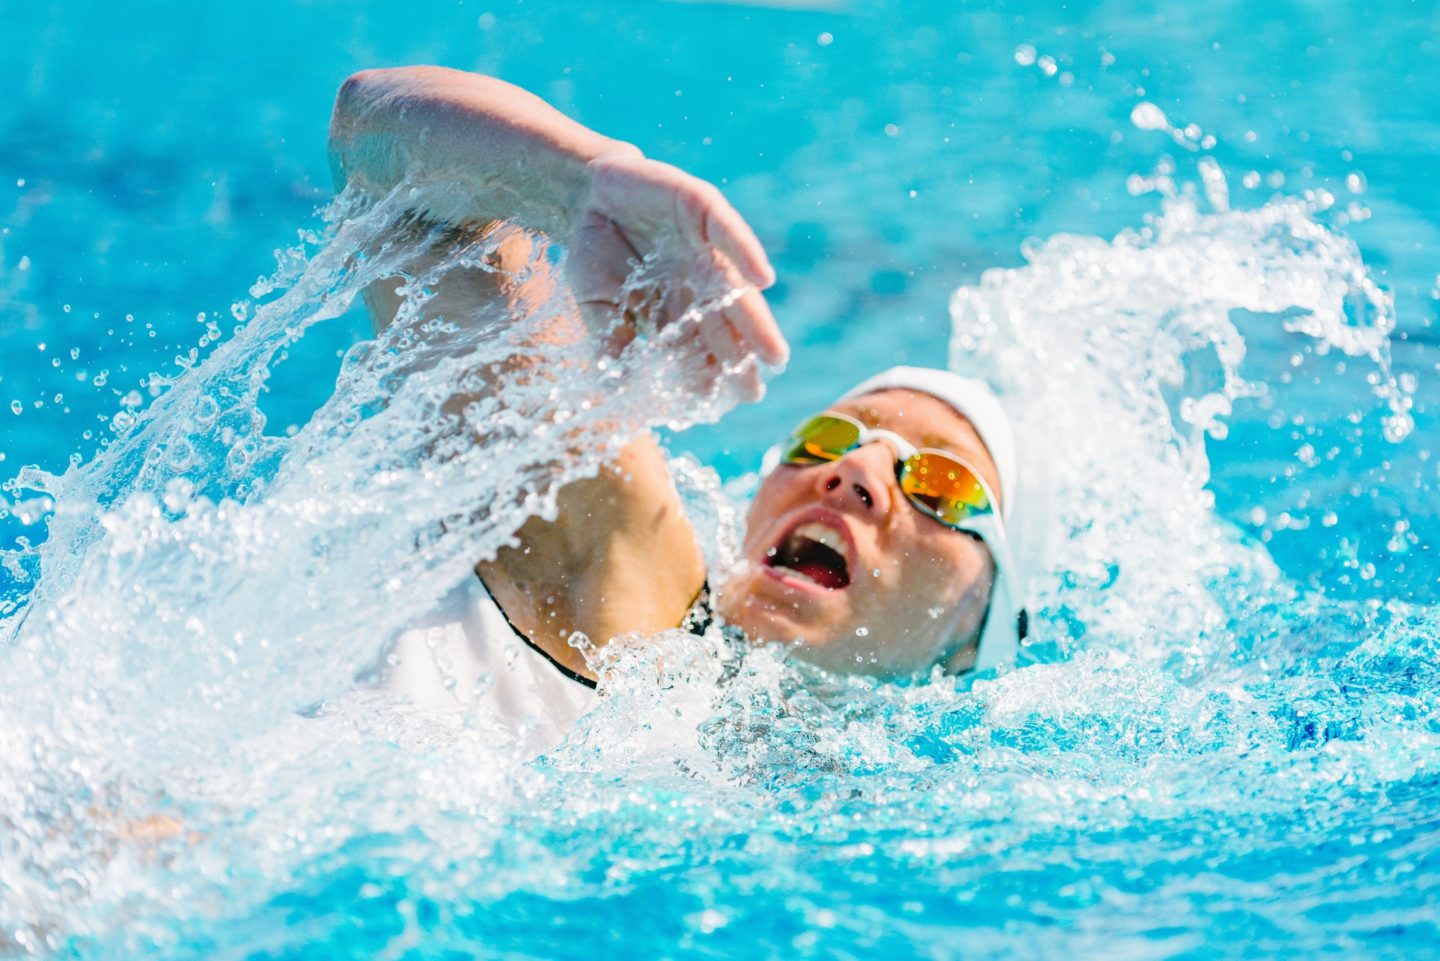 Female swimmer on training in the swimming pool